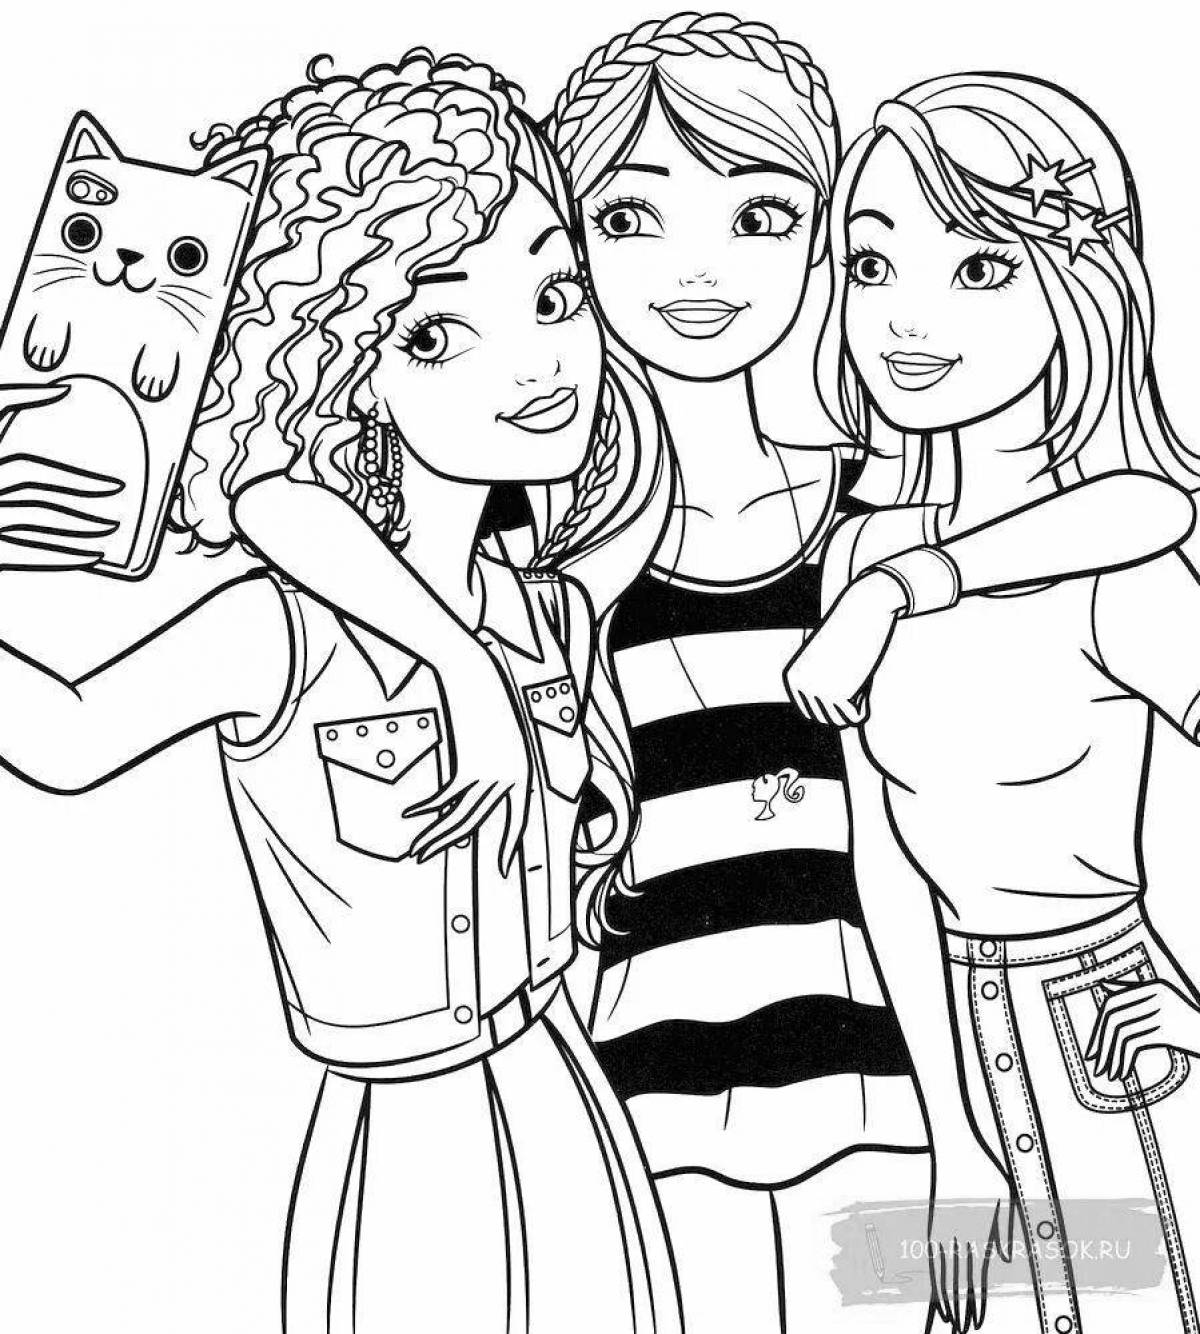 Charming coloring book for girls 8 years old